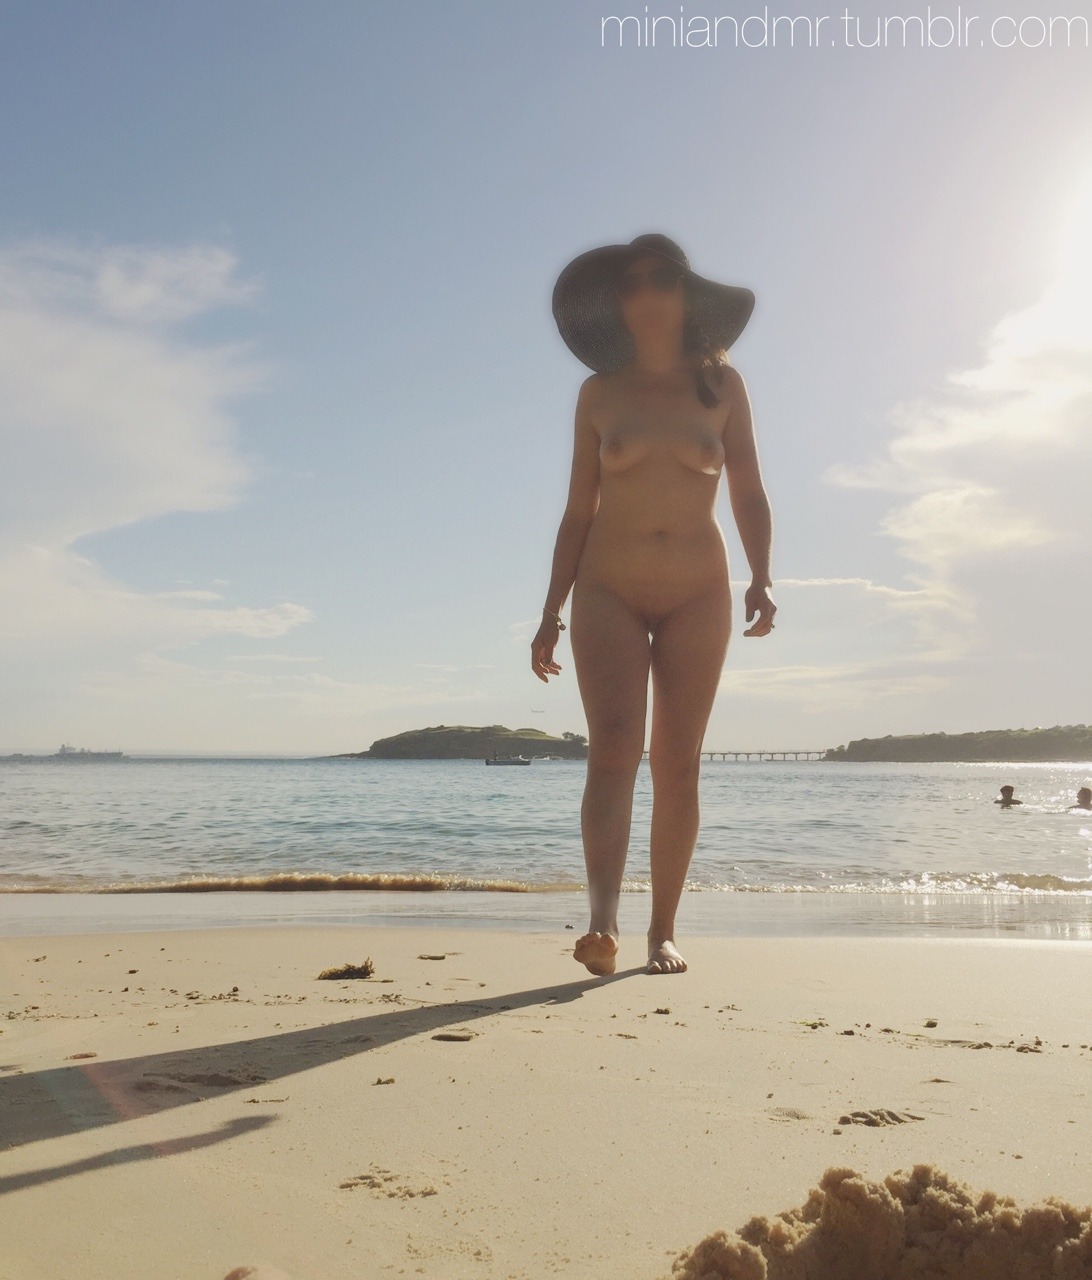 miniandmr:  My first time at a nudist beach today! I was completely naked surrounded